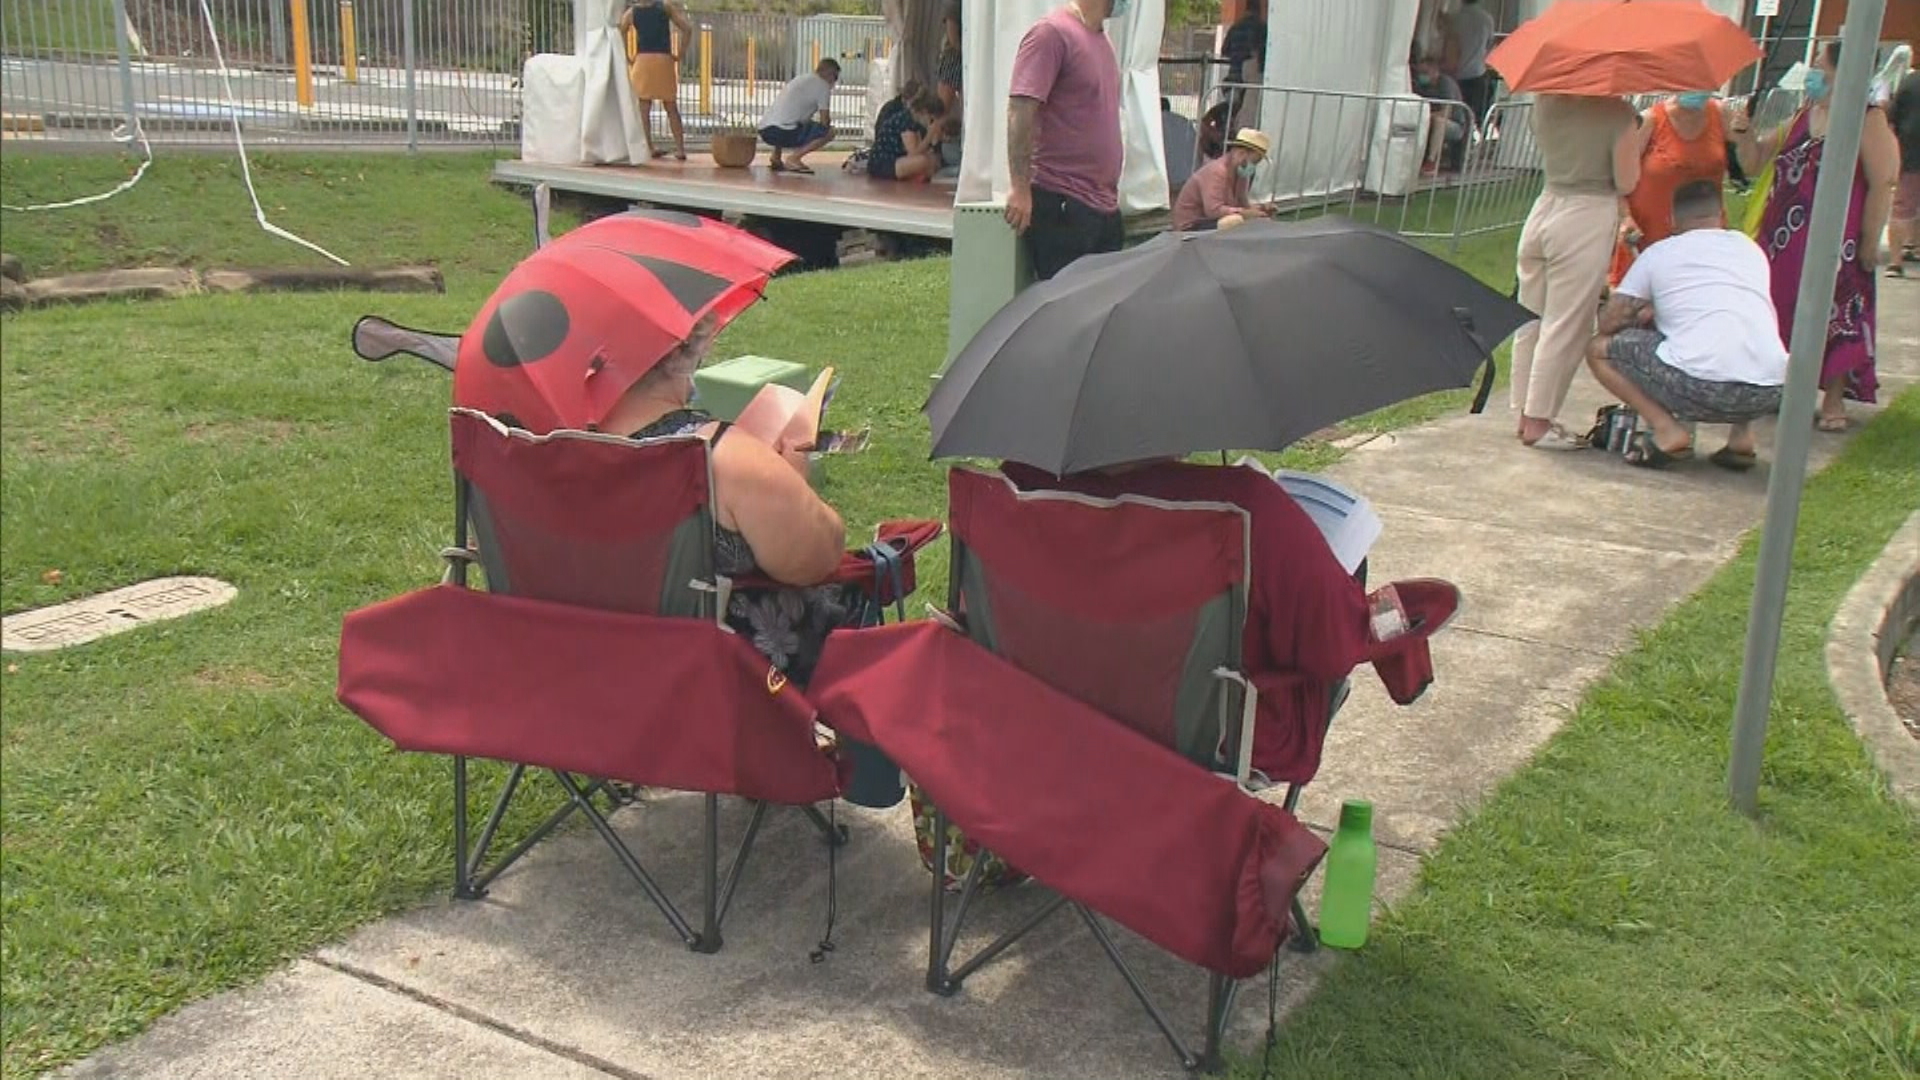 Some came ready for the wait with camp chairs and umbrellas.